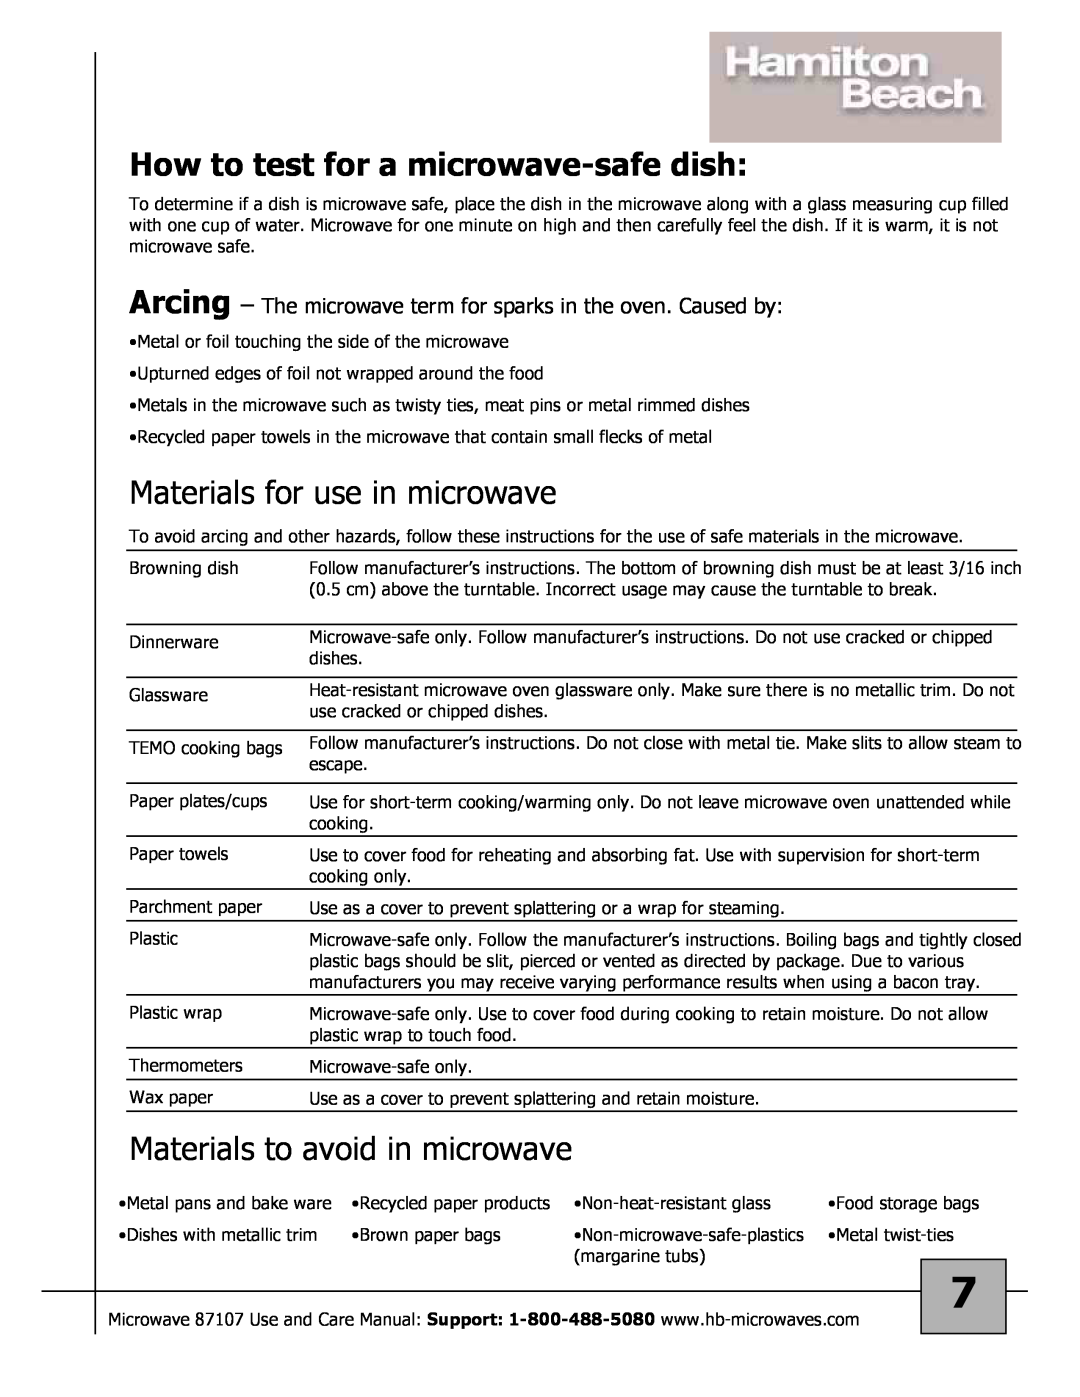 Hamilton Beach 87107 How to test for a microwave-safedish, Materials for use in microwave, Materials to avoid in microwave 